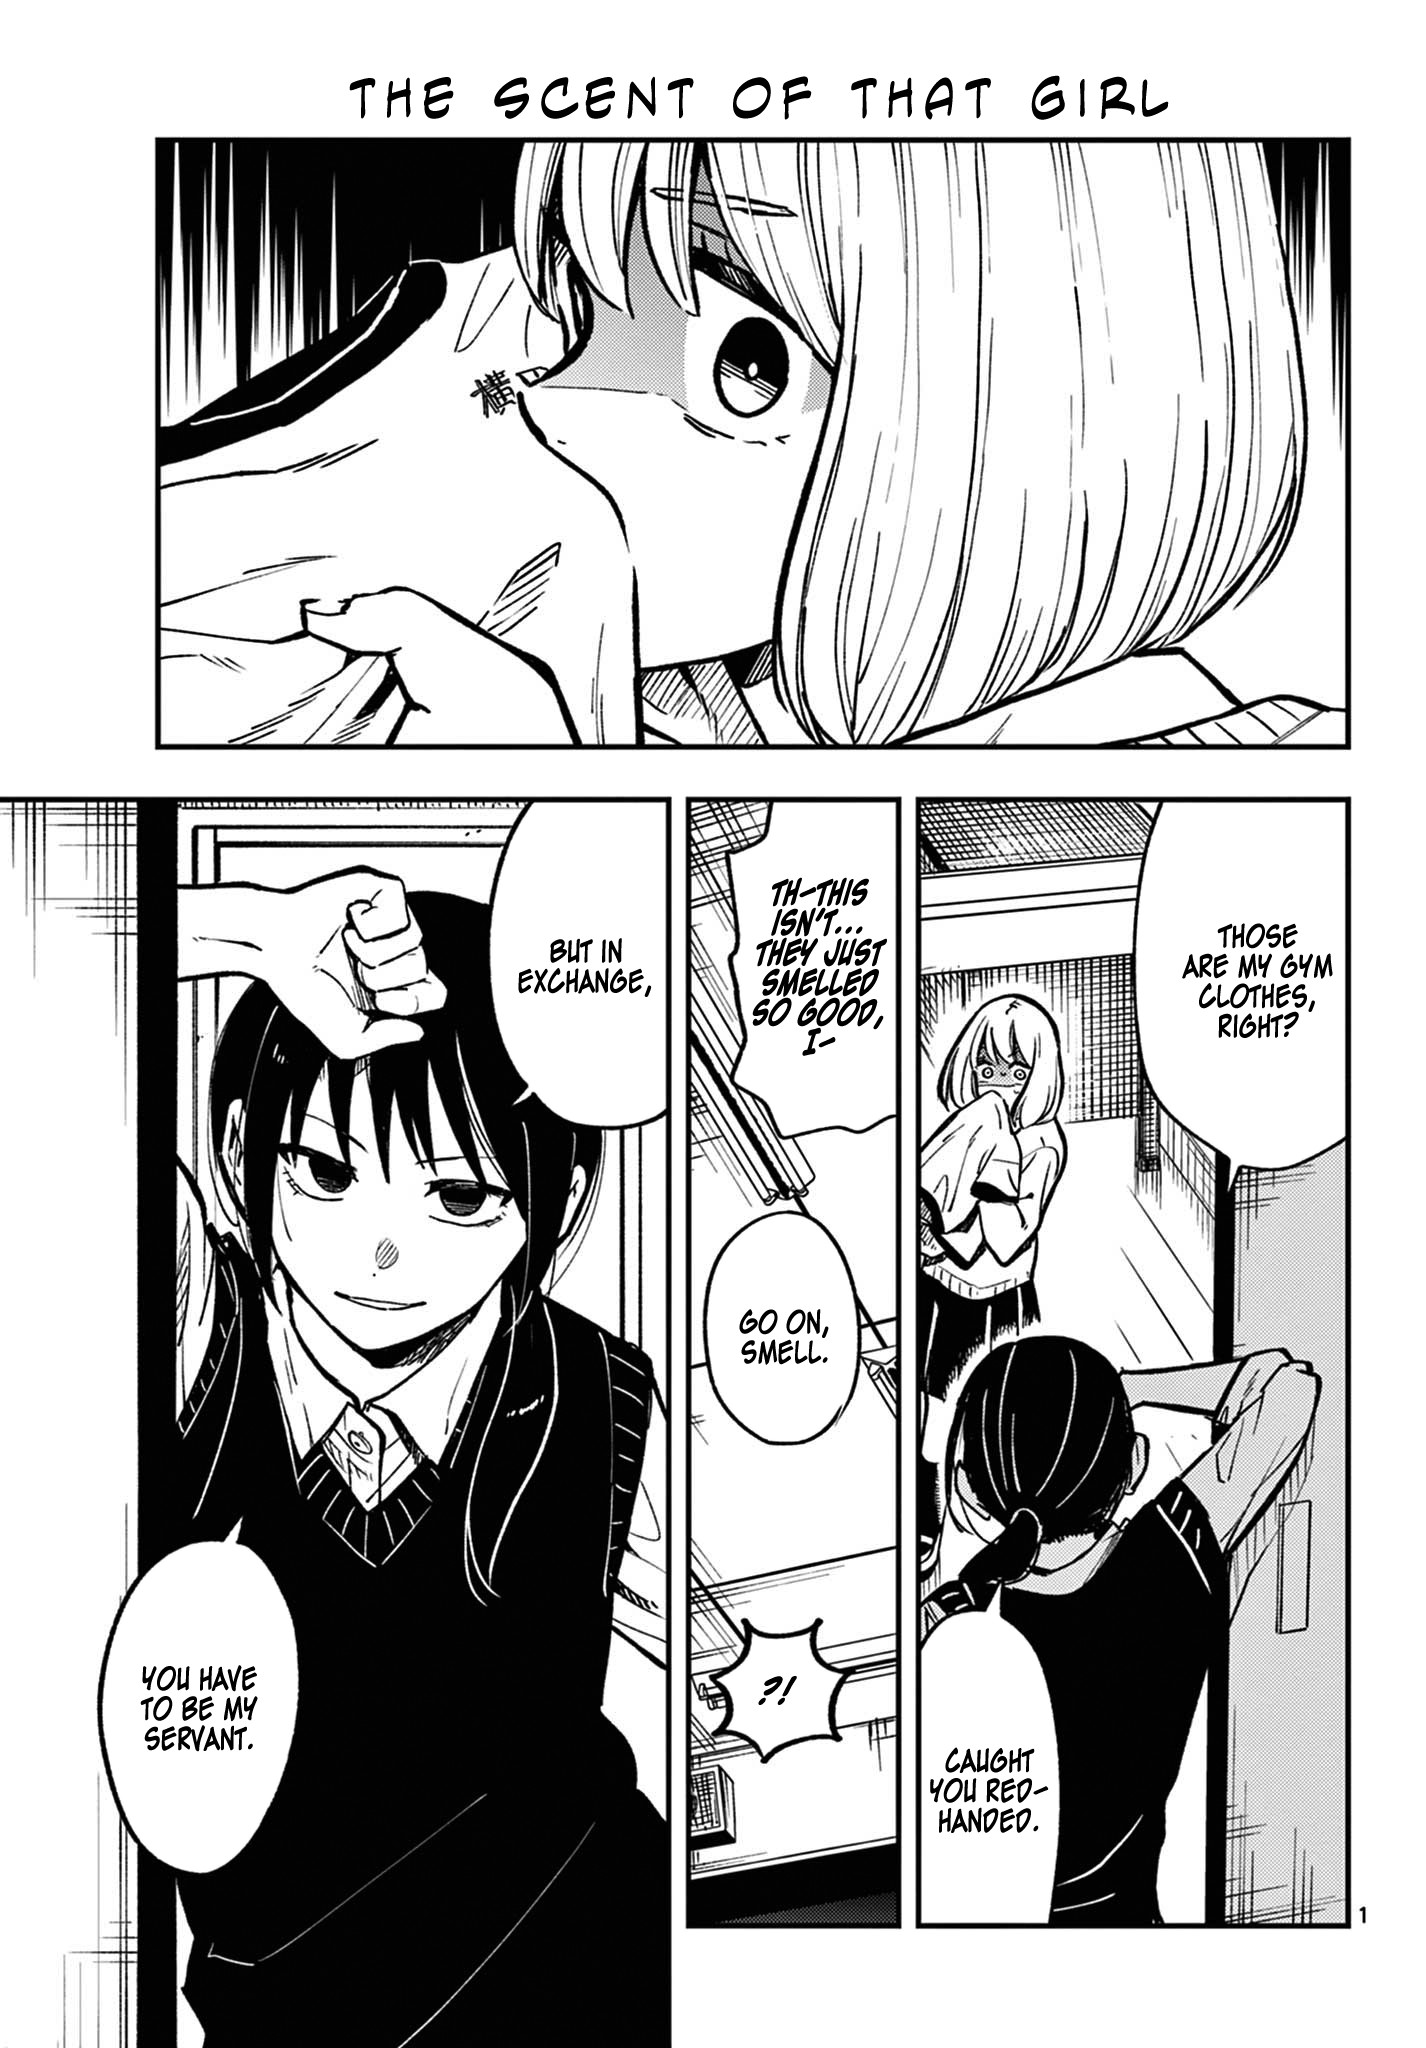 Love Gym Manga Chapter 1 The Scent of that Girl - 0 - Oneshot - Page 1 | Danke.moe